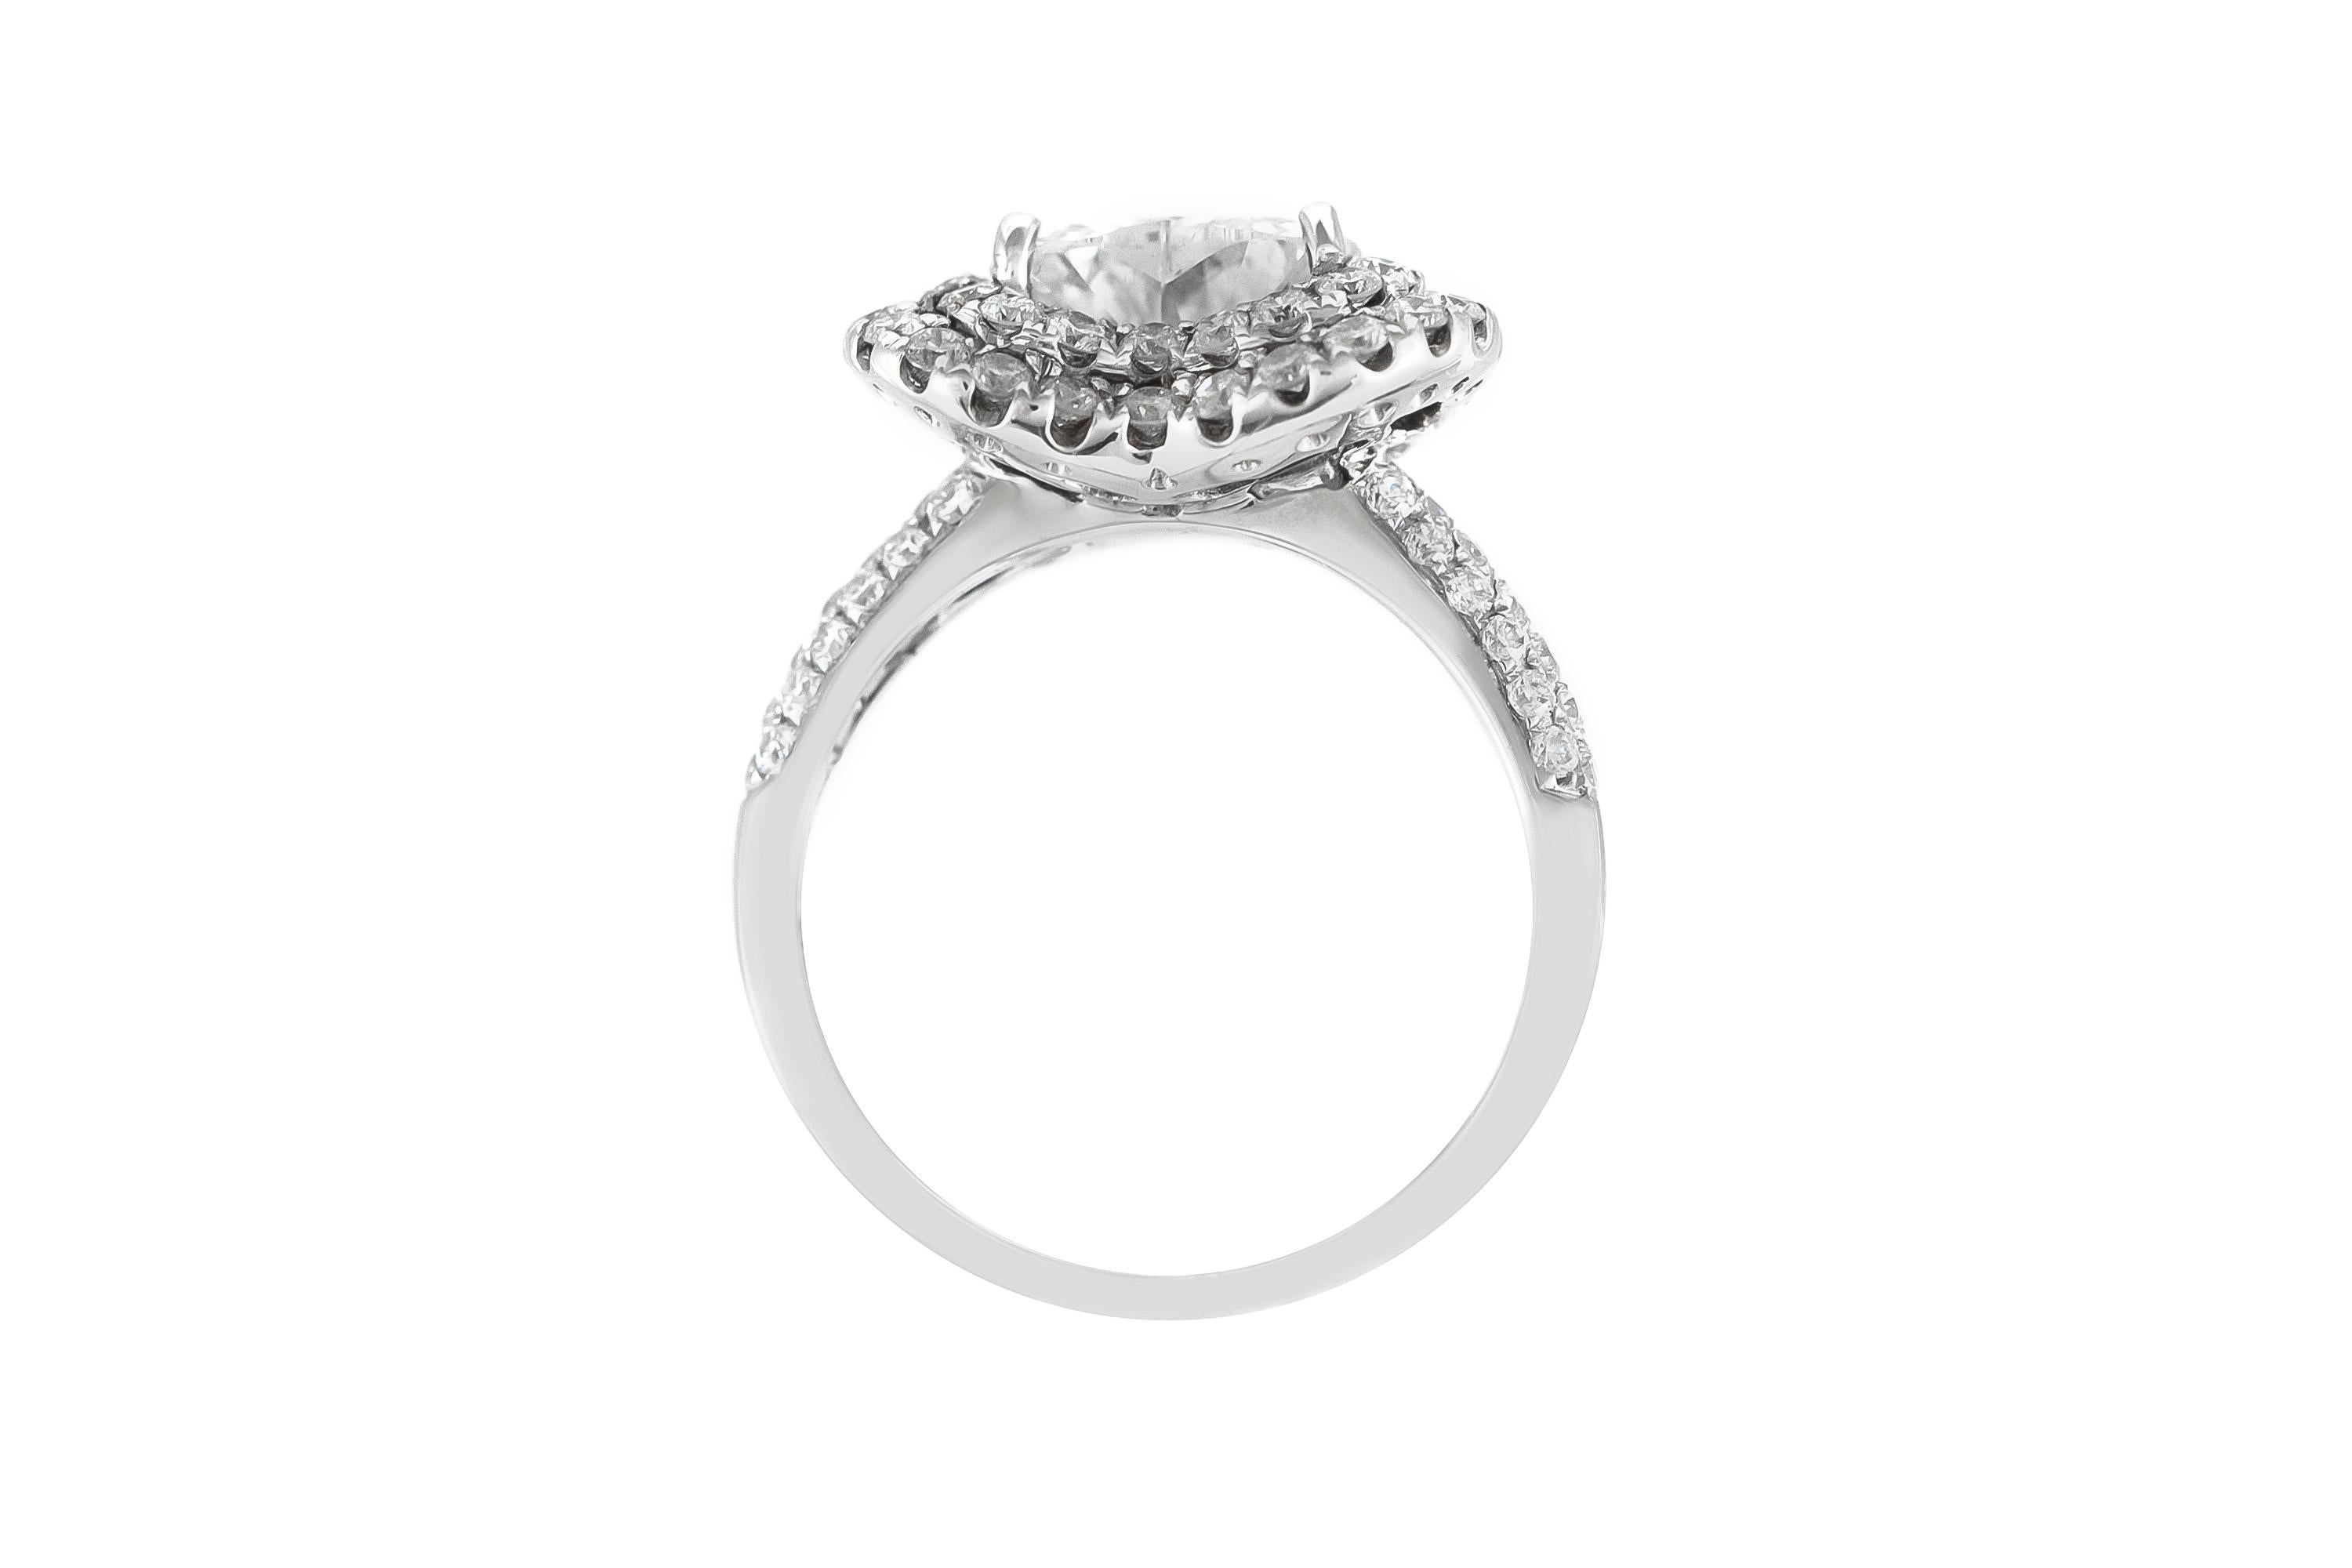 Finely crafted in 18k white gold with a heart cut center Diamond weighing approximately a total of 1.50 carats.
Color I, Clarity VS
The ring features round cut Diamonds weighing approximately a total of 1.40 carats.
Circa 2000s
Size 6 1/4, resizable